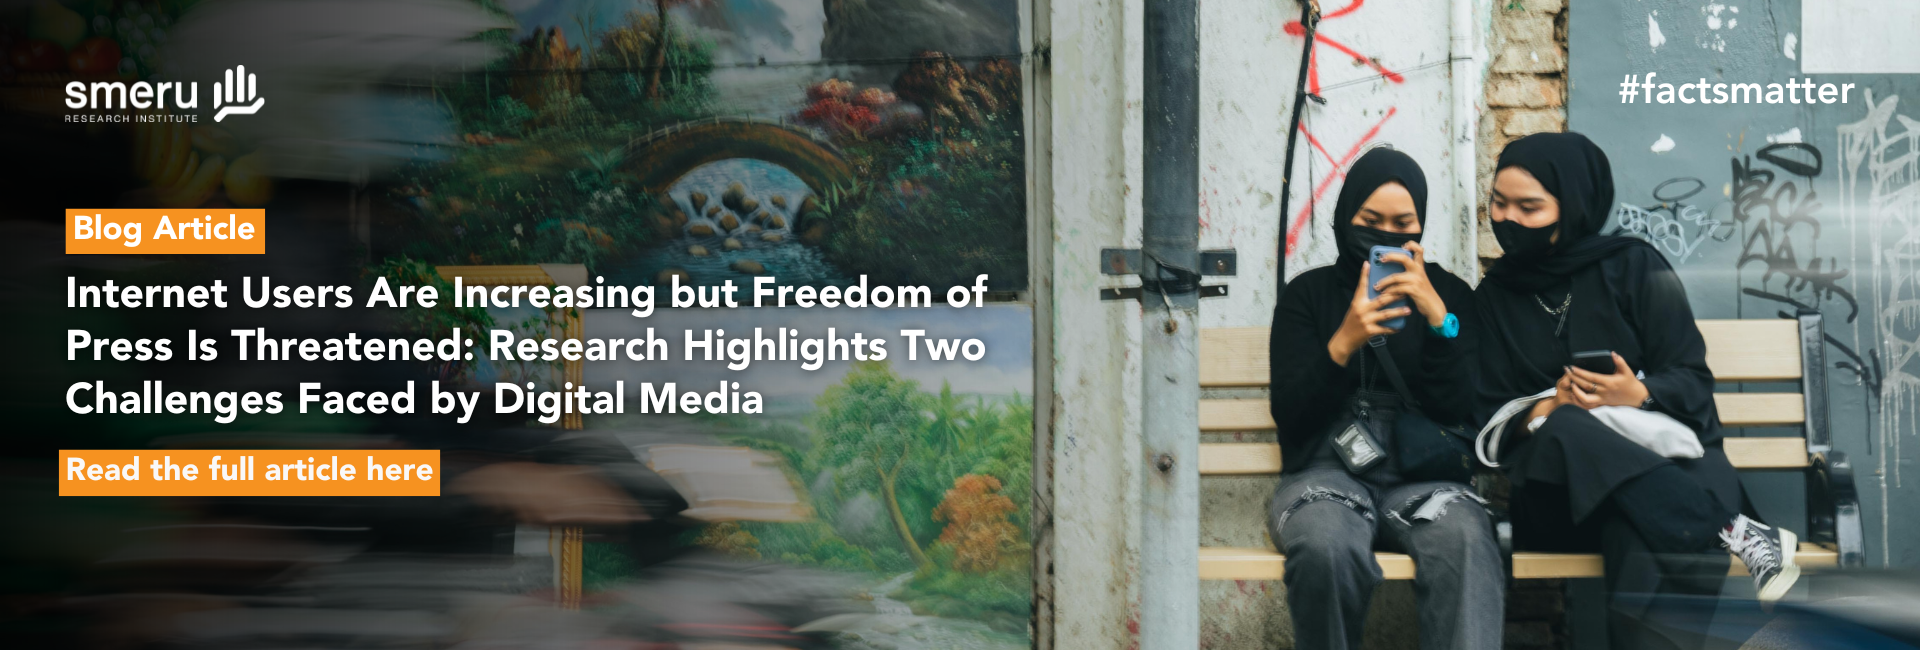 Internet Users Are Increasing but Freedom of Press Is Threatened